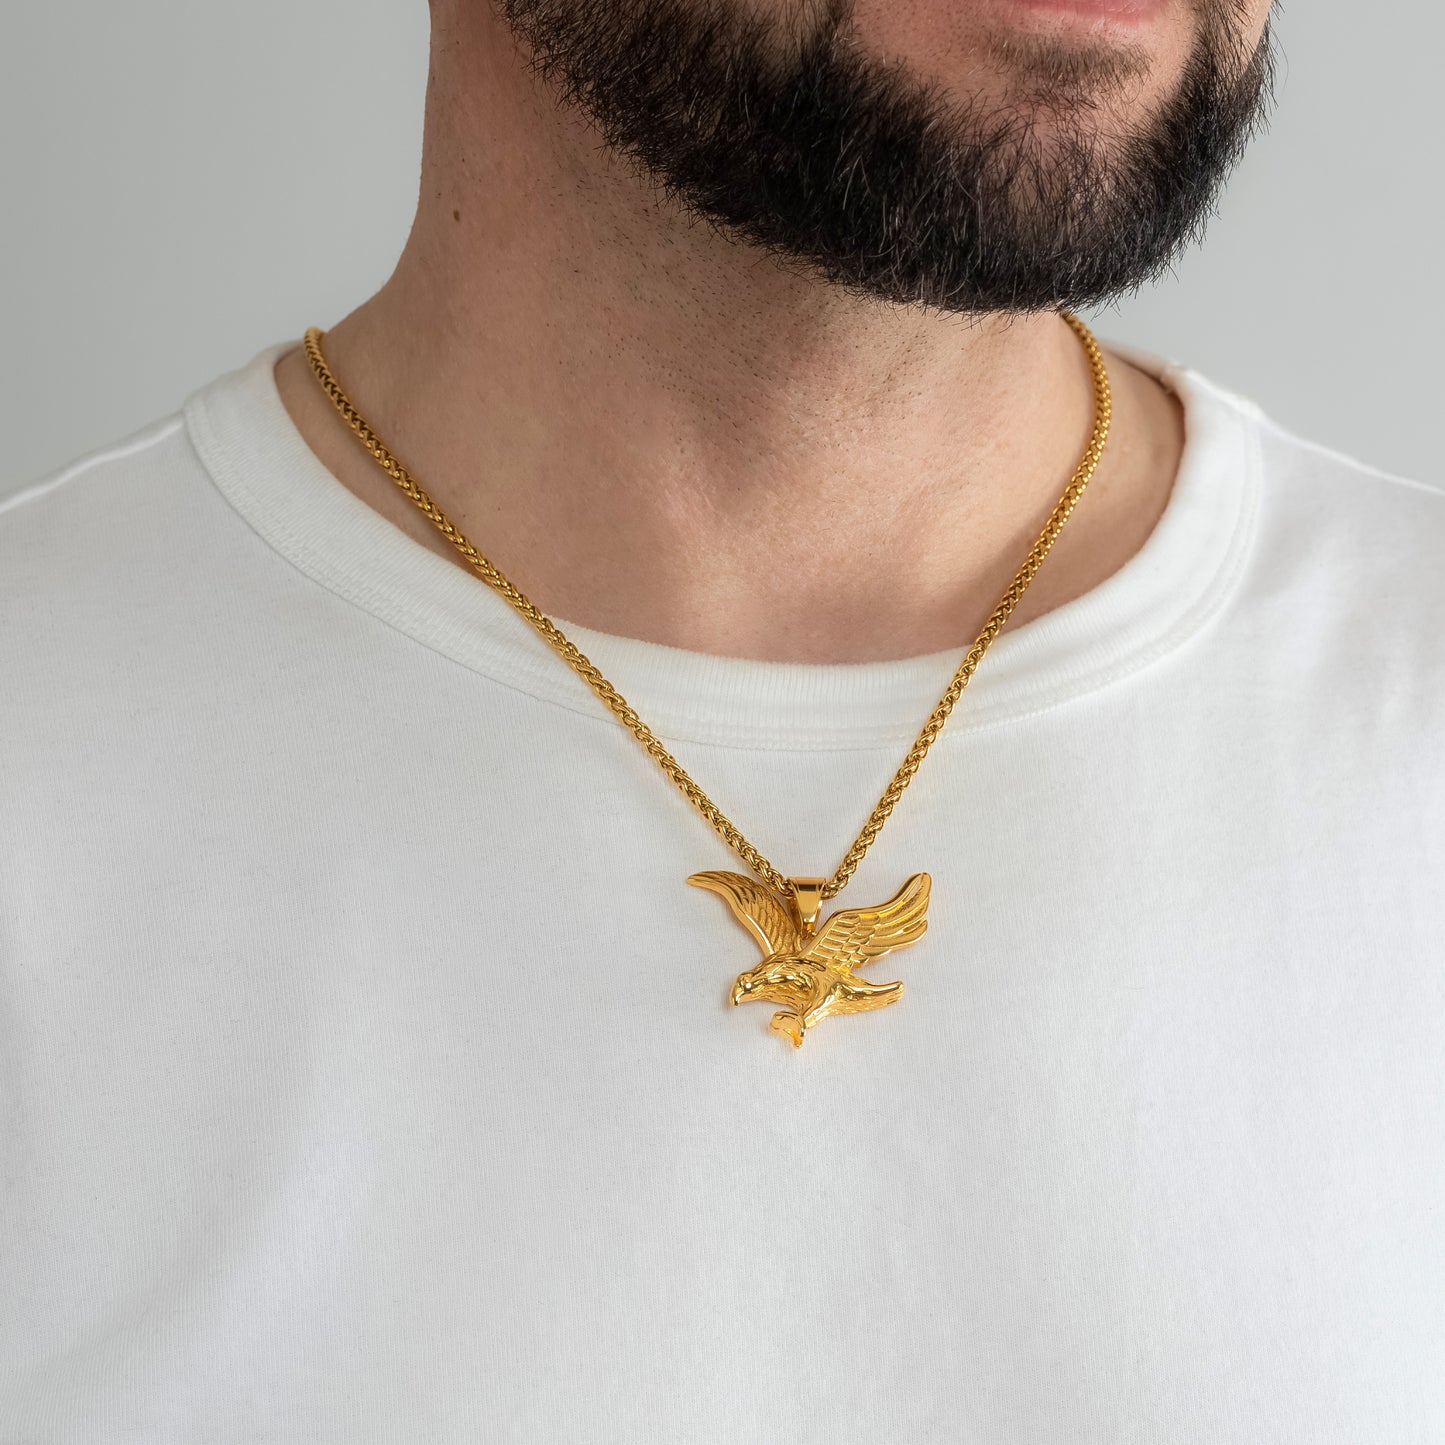 A male model in a white t-shirt wearing a Eagle Gold Pendant with a 3mm Spiga (Wheat) Gold chain 22 inches. Close-up image of the tarnish-free, sweatproof and waterproof powerful men's necklace.